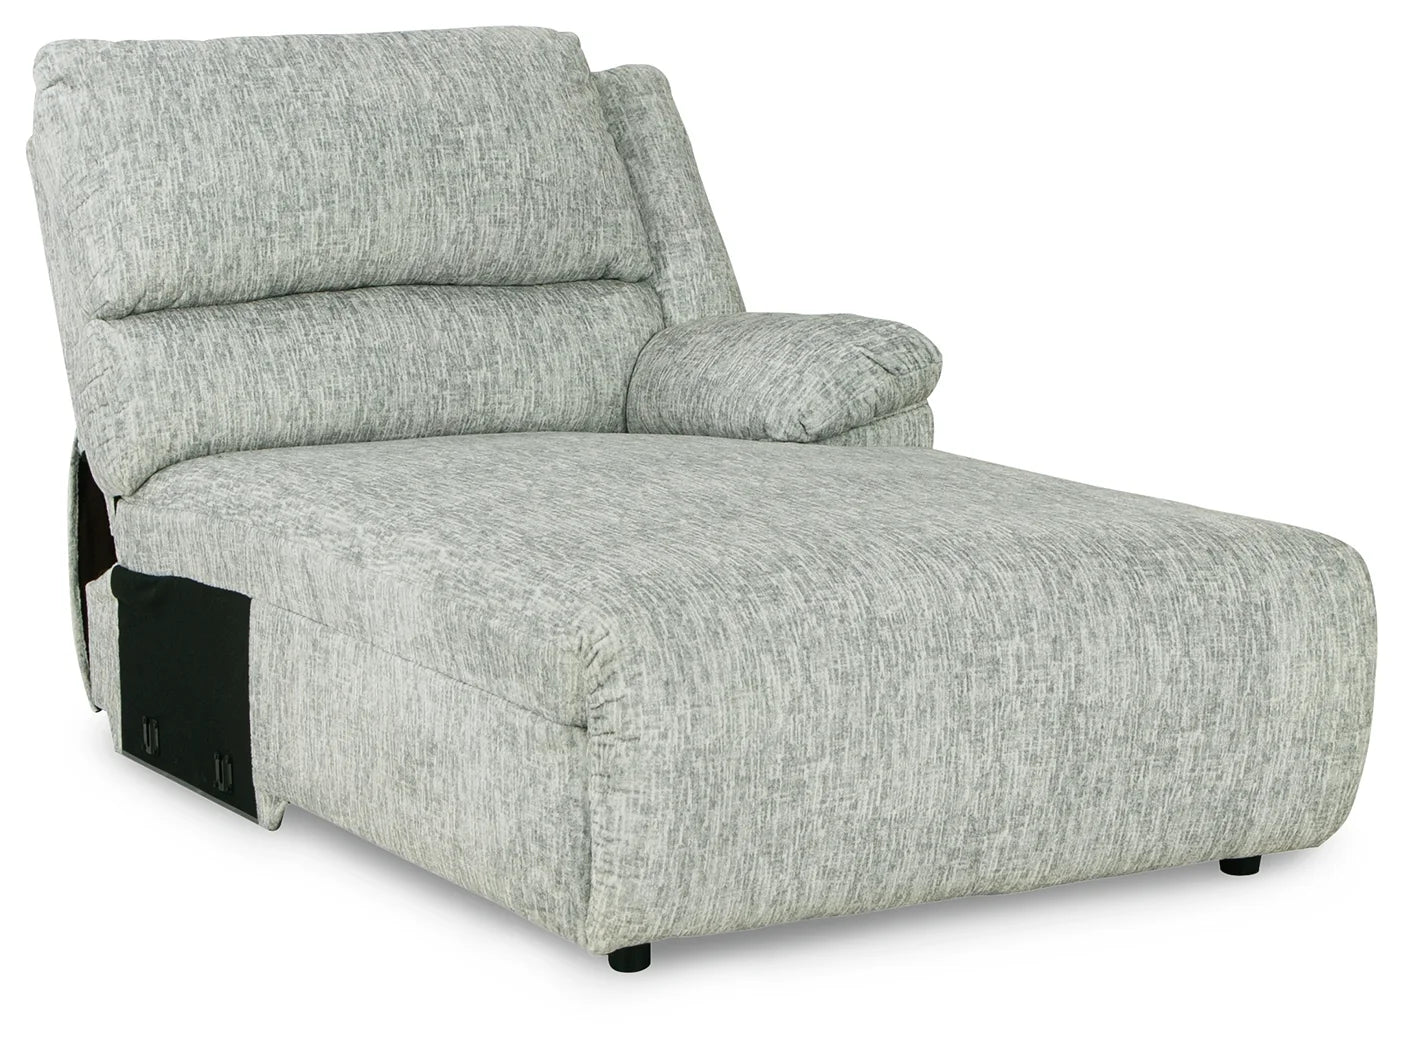 Mcclelland - Gray - 3-Piece Reclining Sectional With Raf Press Back Chaise